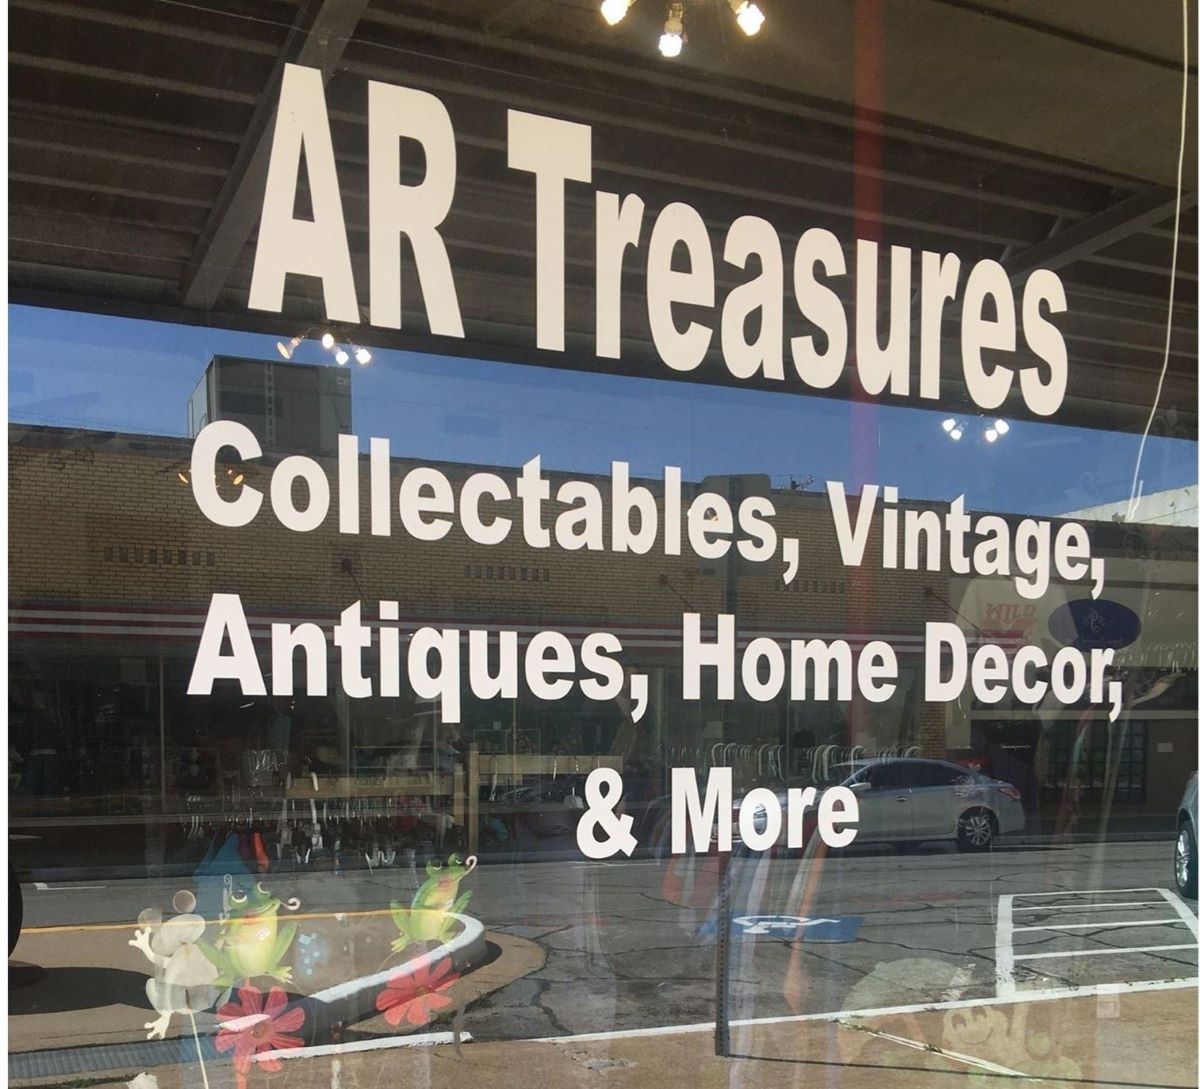 Palestine, texas grant program makes ar treasures the coolest place to shop in town Article Photo